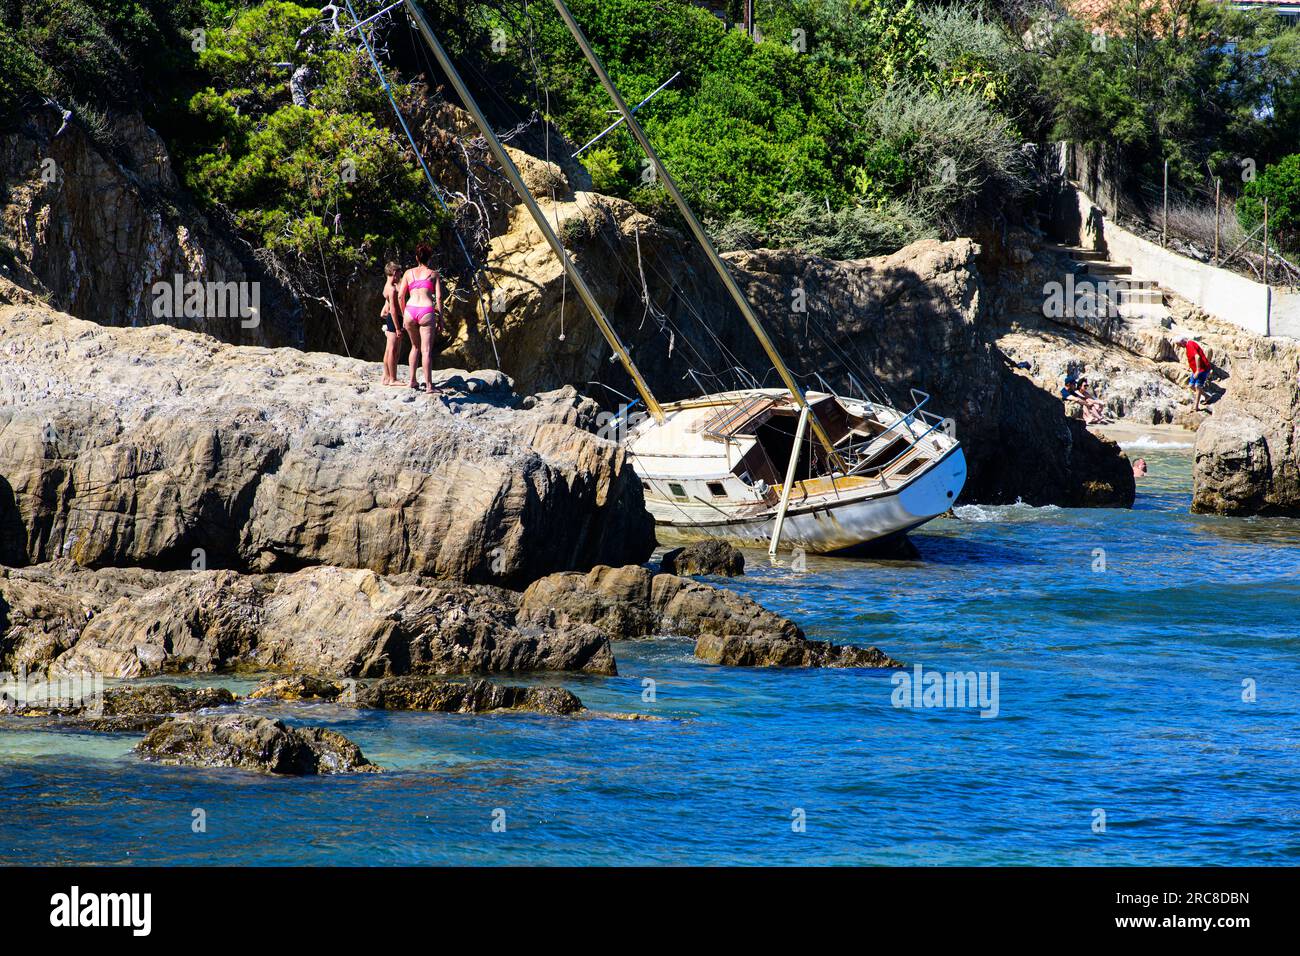 People looking at stranded boat on rocky coastline, surrounded by nature's beauty and serene waters. Stock Photo